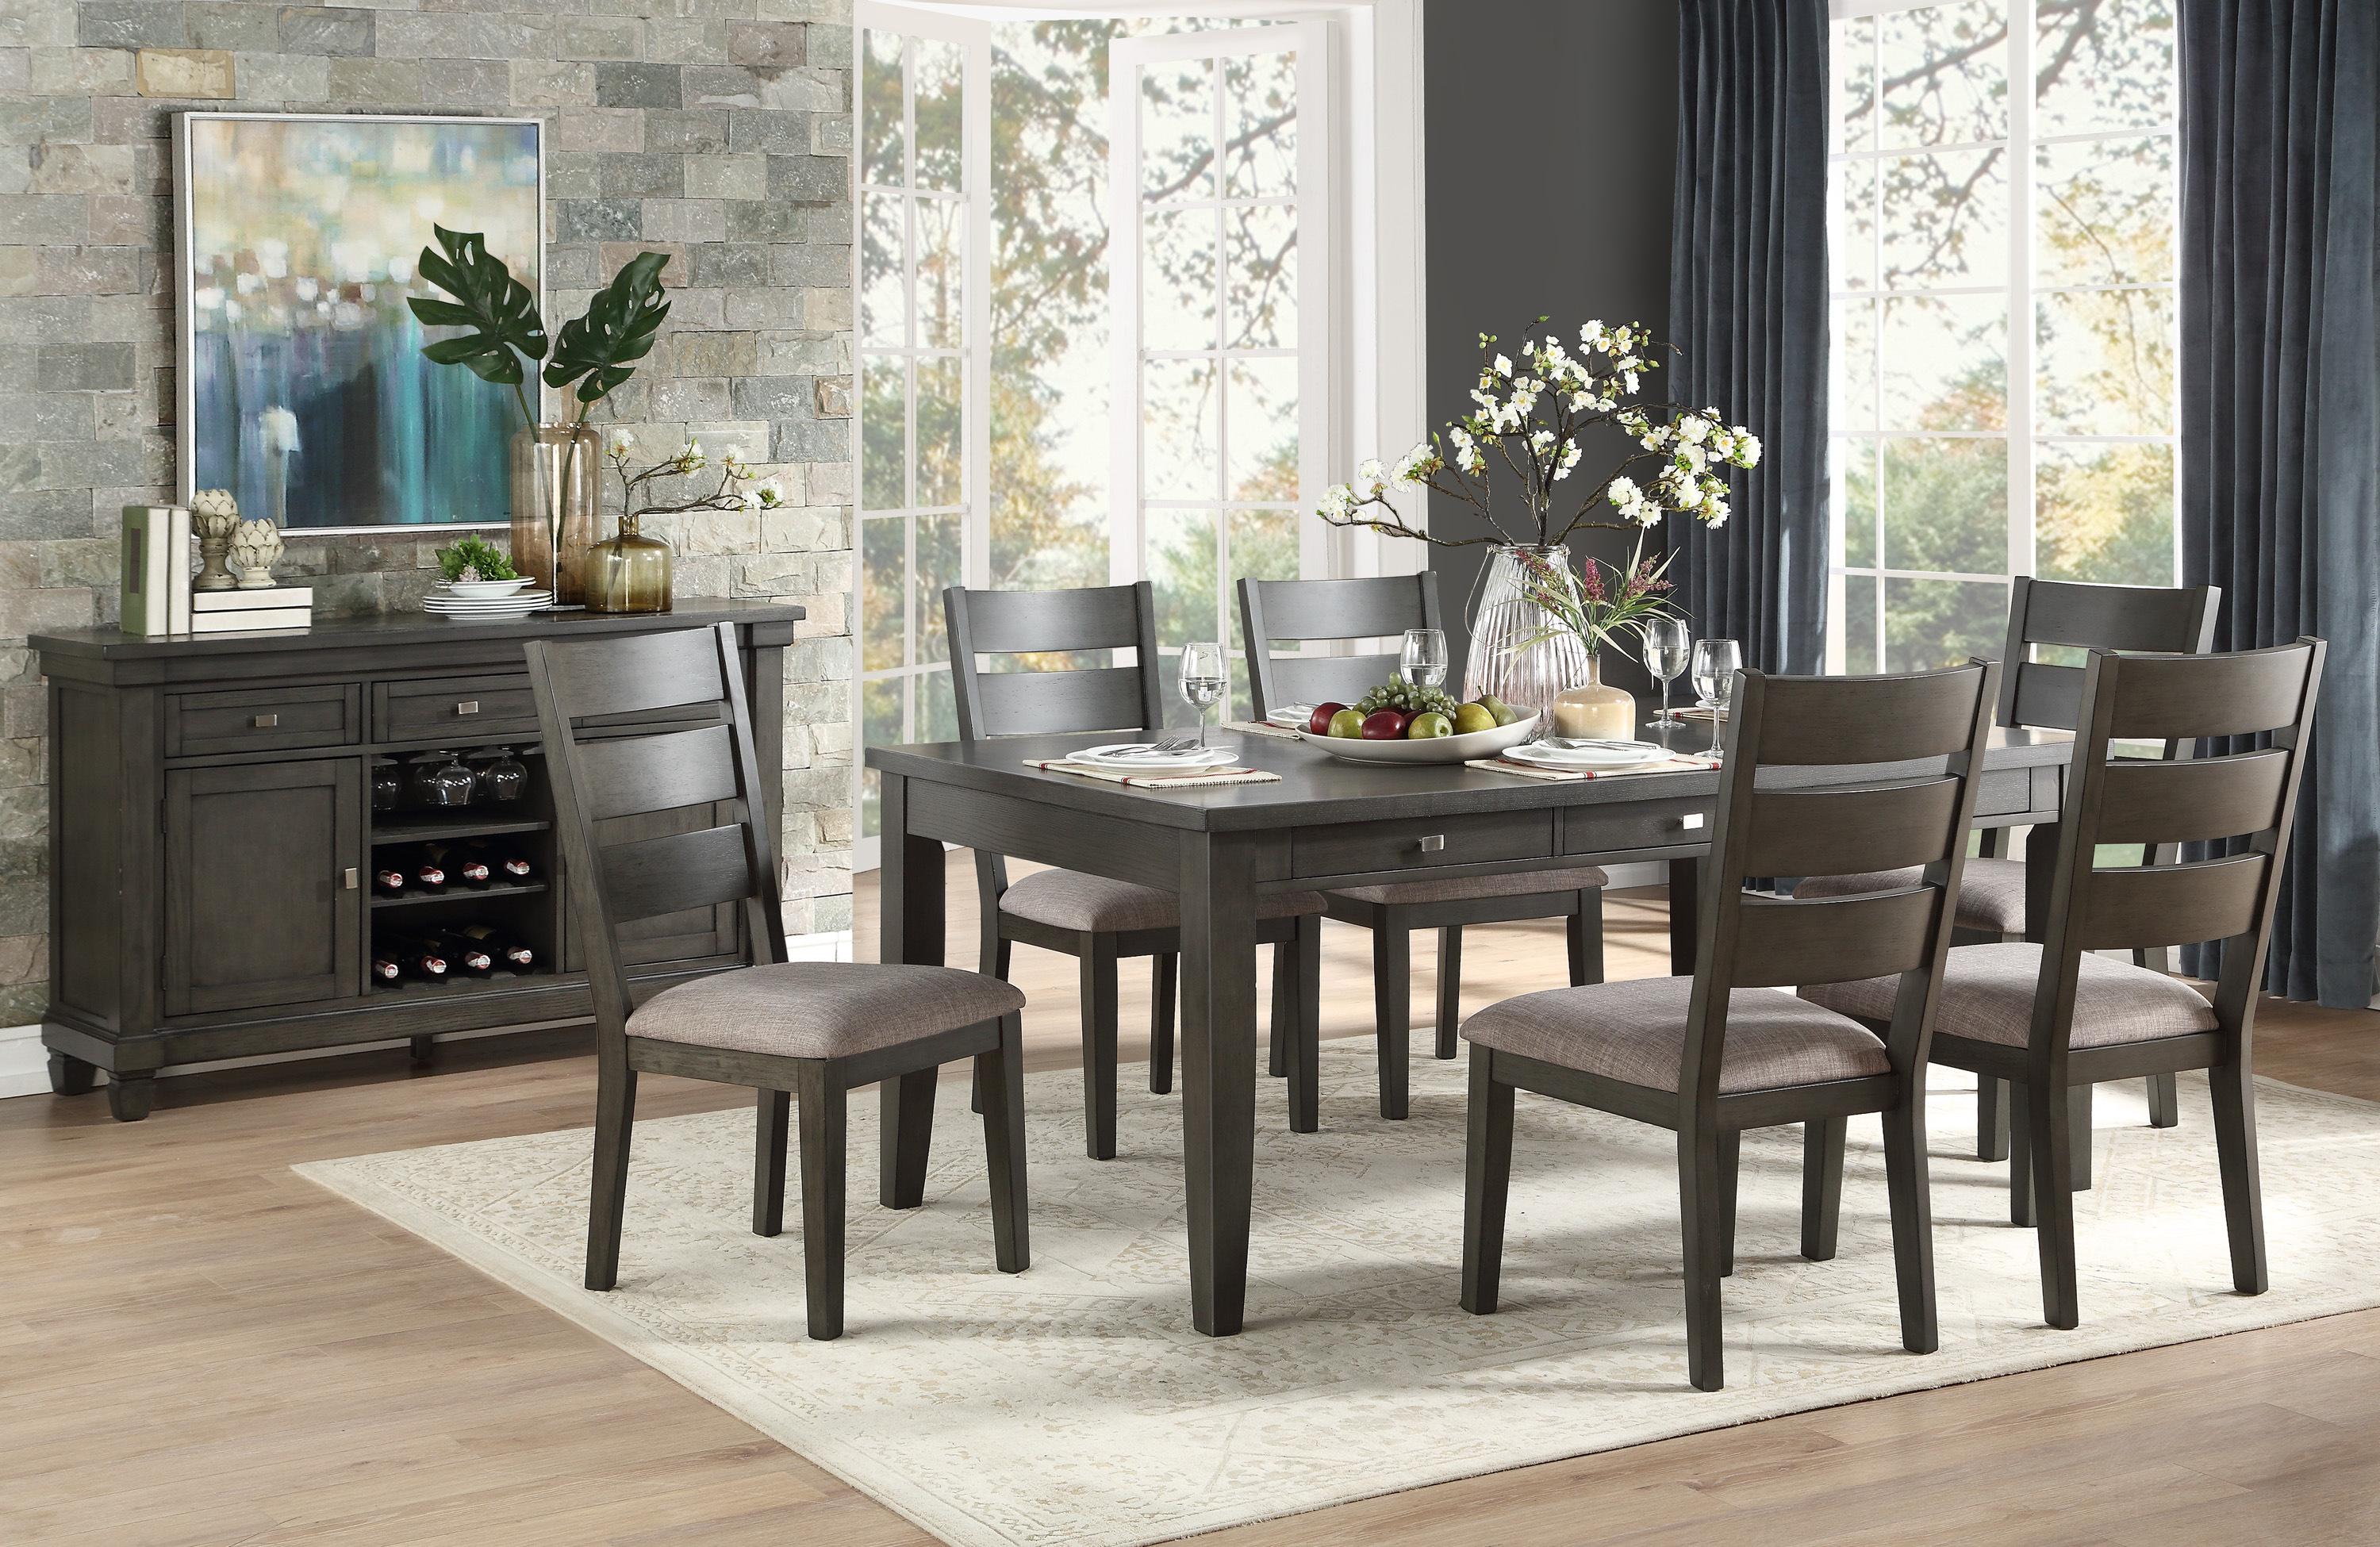 Transitional Dining Room Set 5674-72*7PC Baresford 5674-72*7PC in Gray Polyester